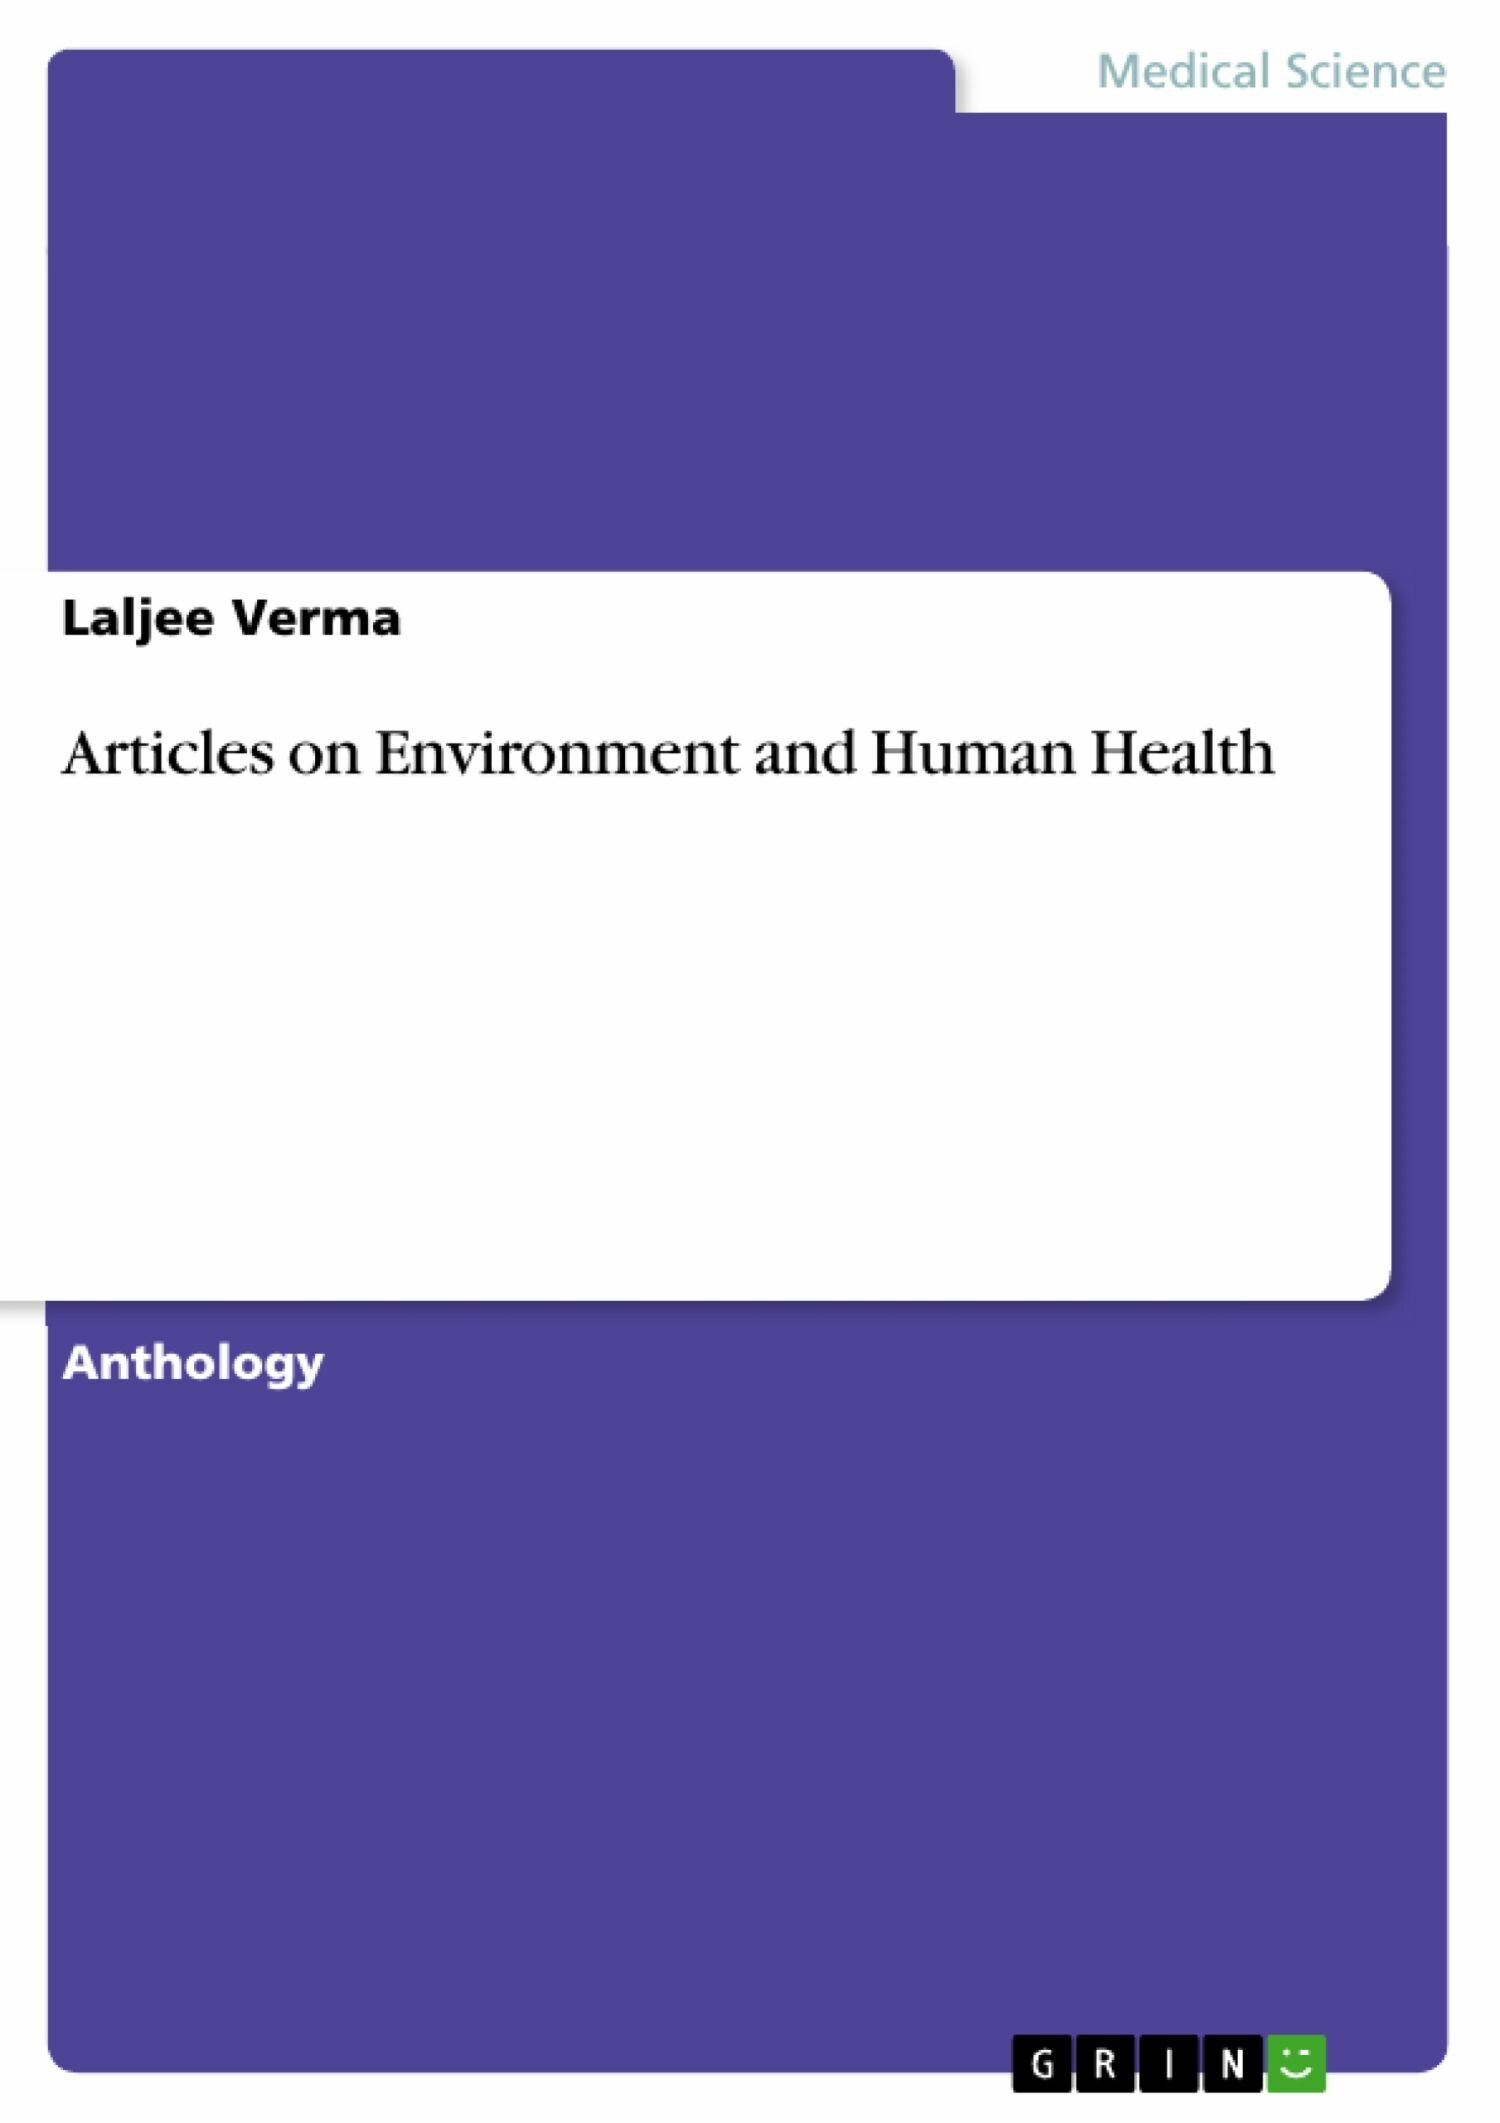 Articles on Environment and Human Health